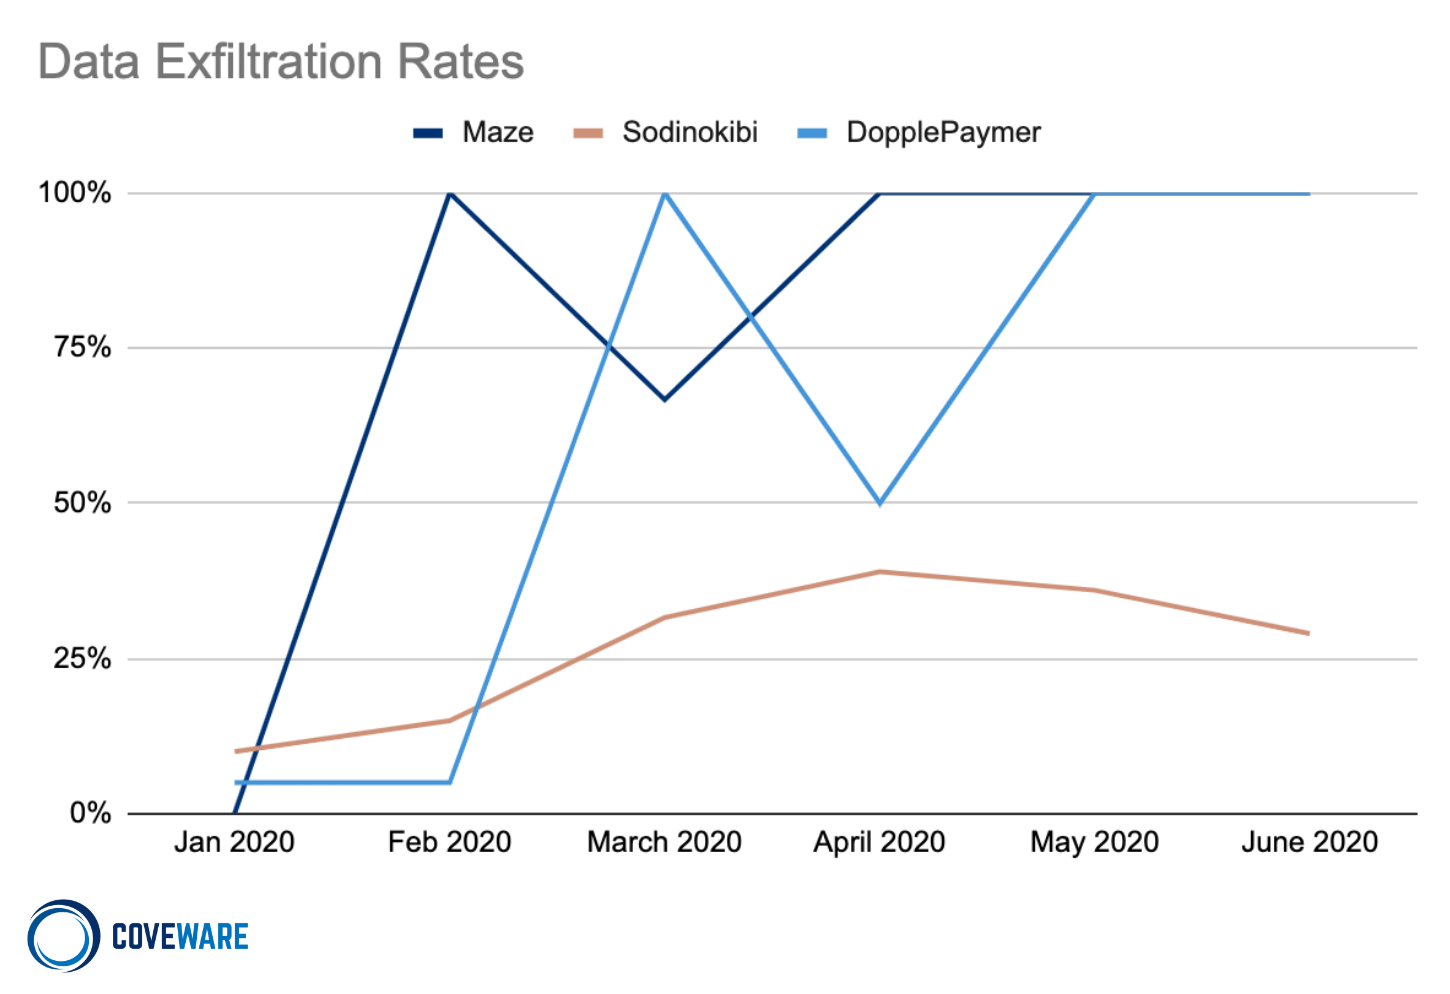 Data Exfiltration Rates